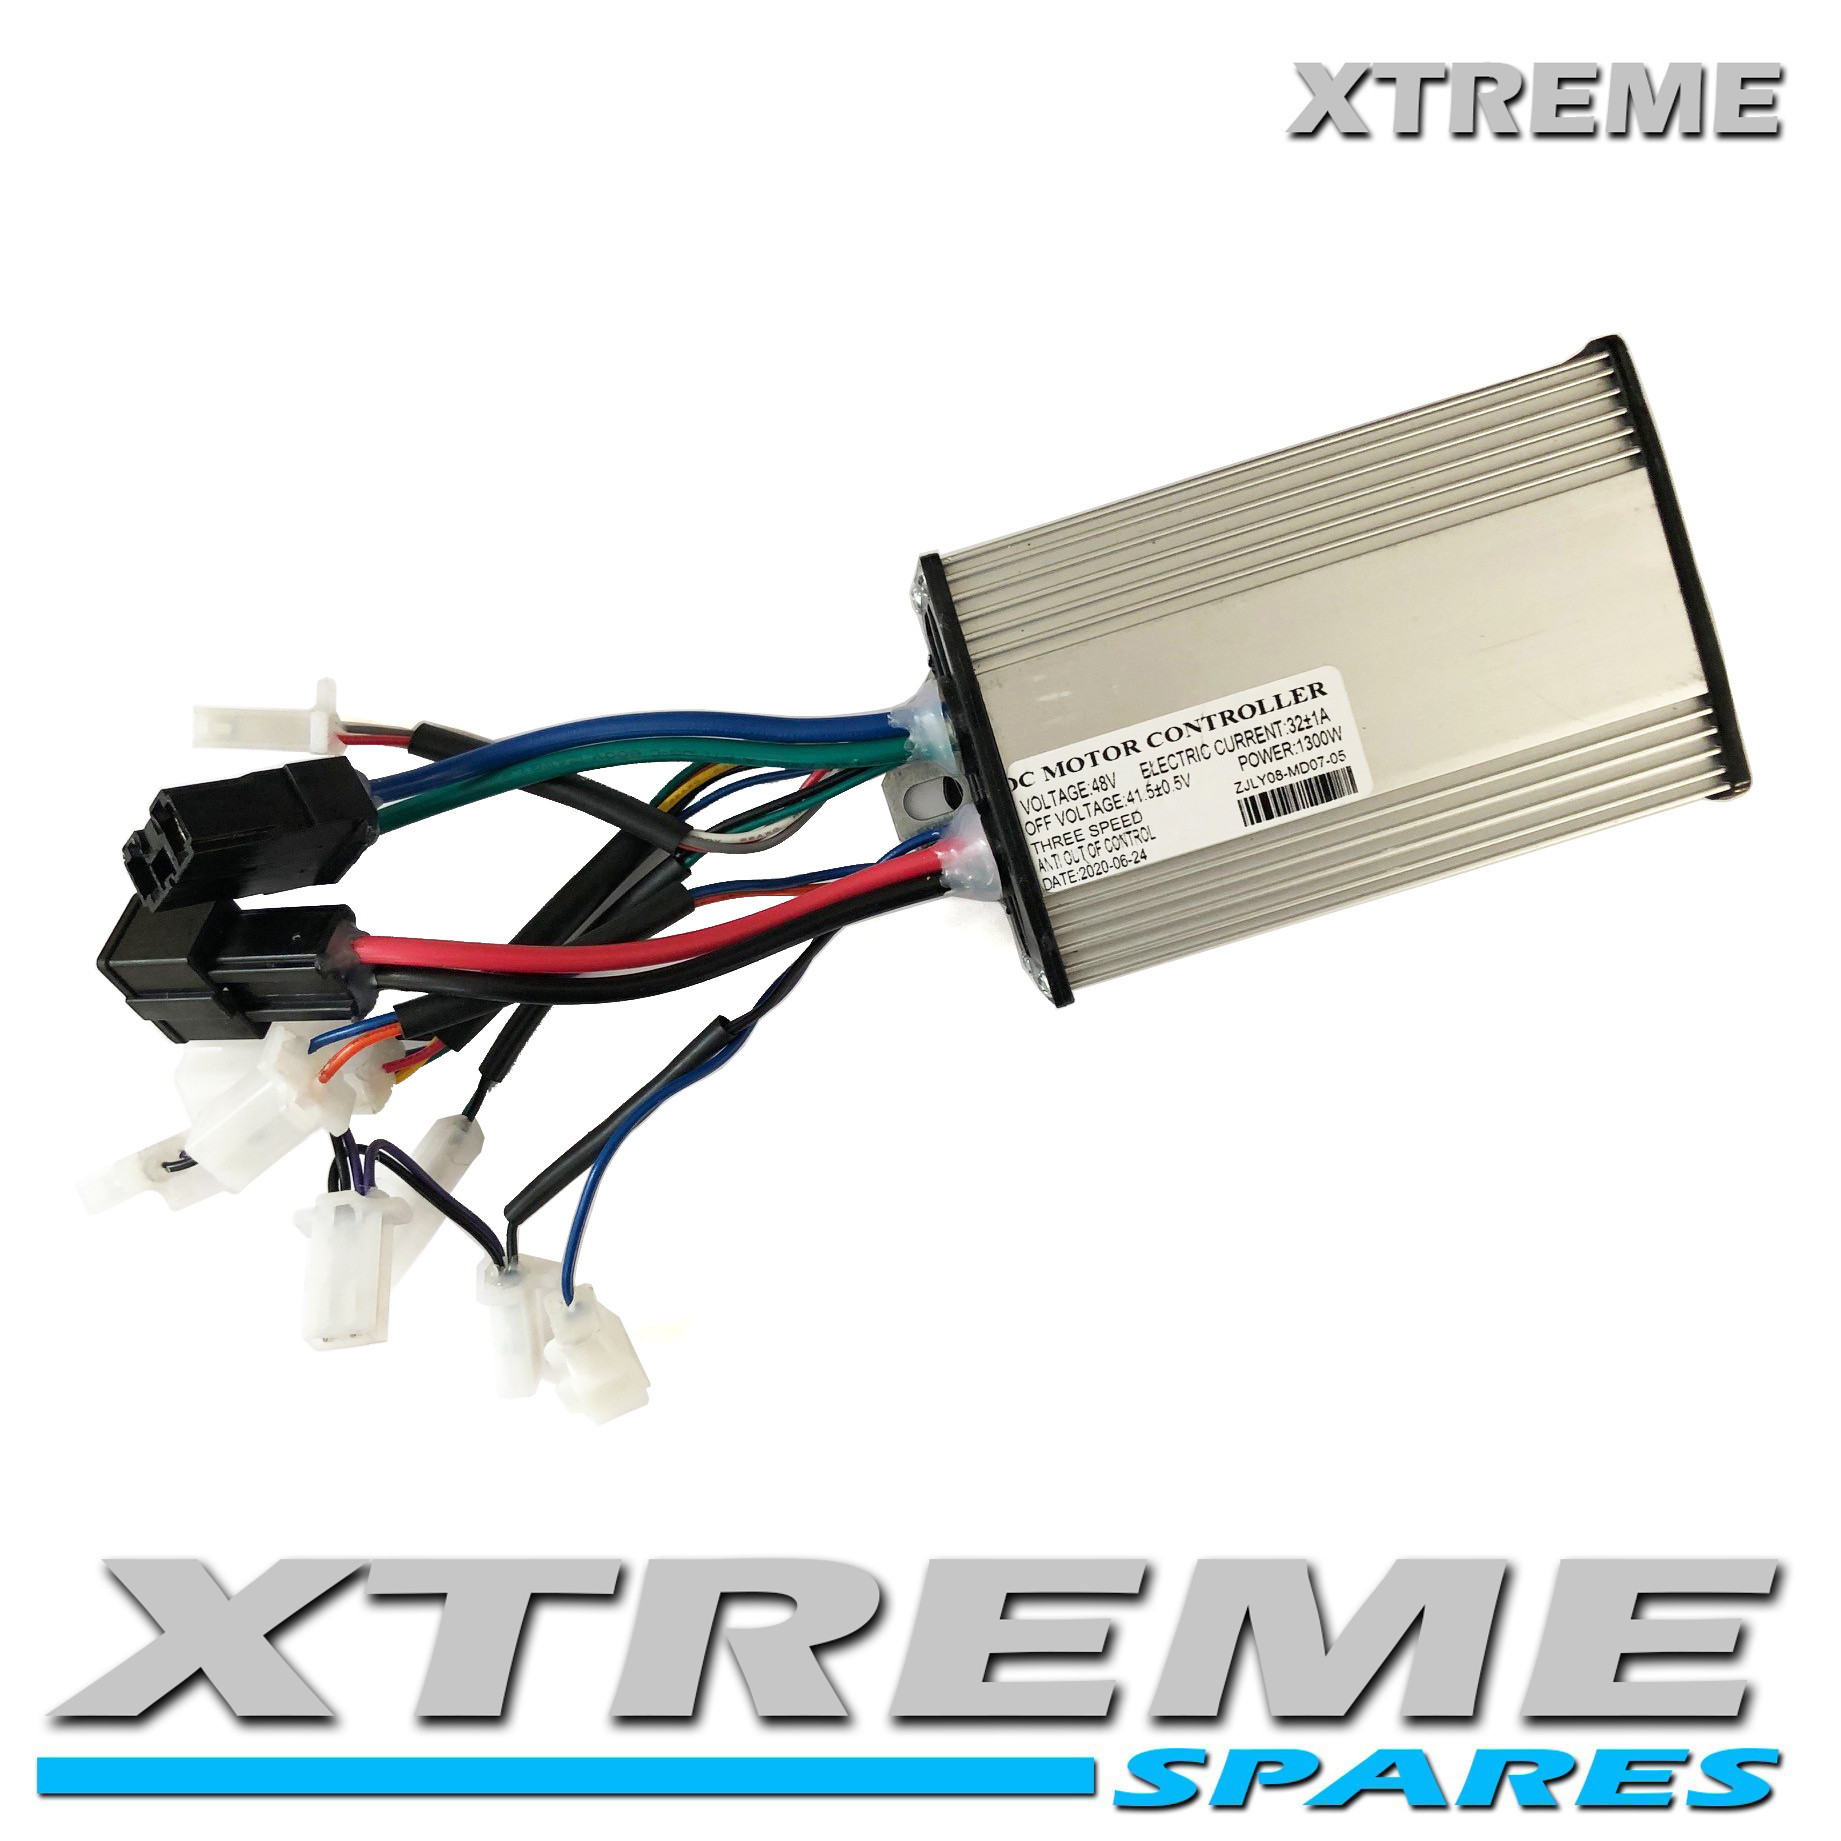 XTREME ELECTRIC XTM MX-PRO 48V 1300W LITHIUM REPLACEMENT SPEED CONTROLLER ZJYY08-MD07-03